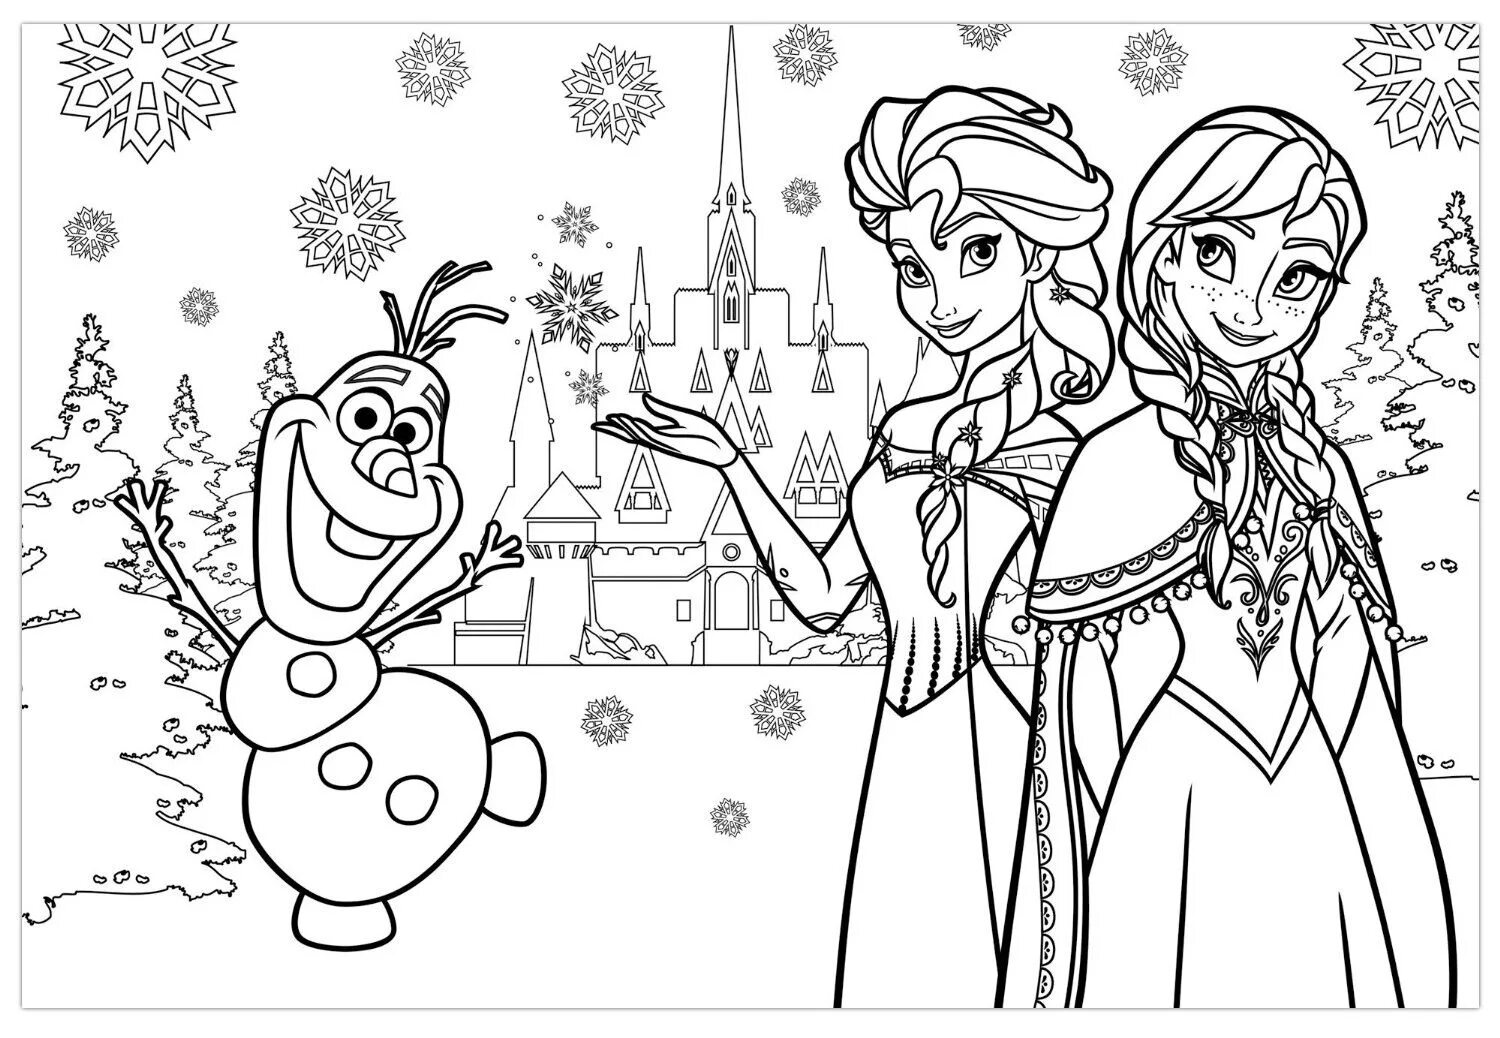 Elsa and anna in good quality #11